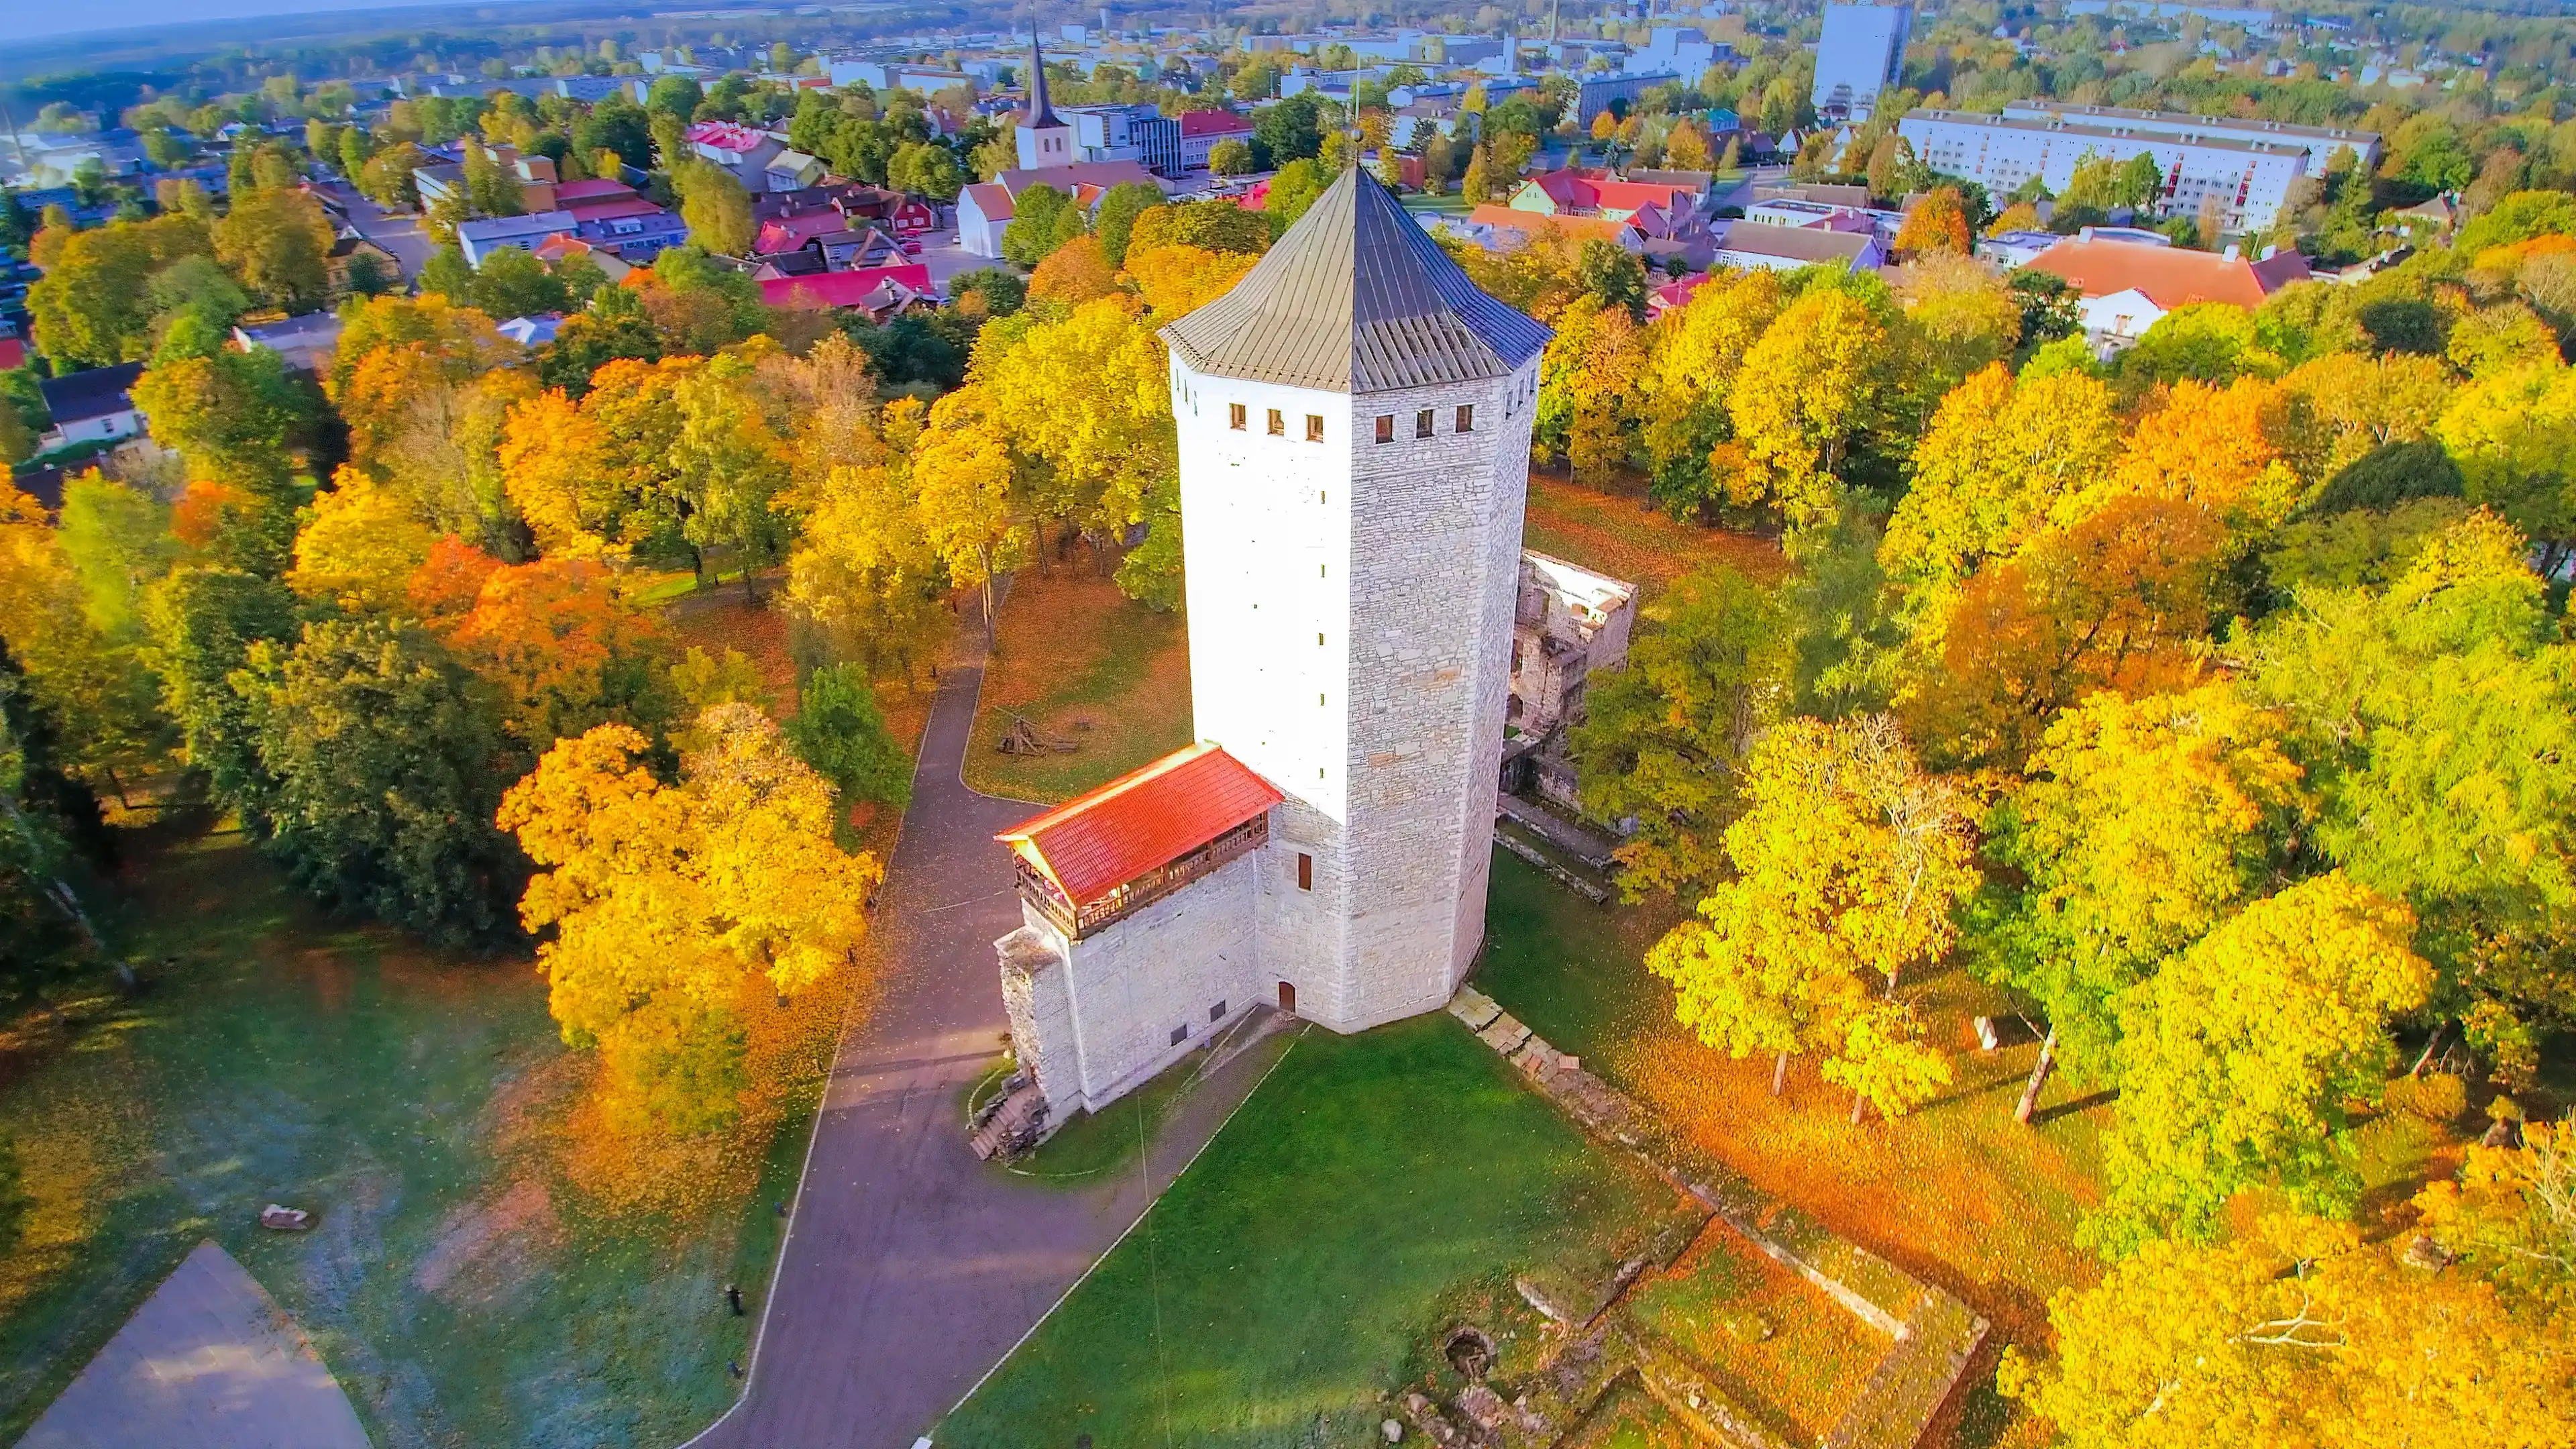 The big tower on the forest in Paide. The Paide tower located on the middle of the forest in Lahemaa estonia